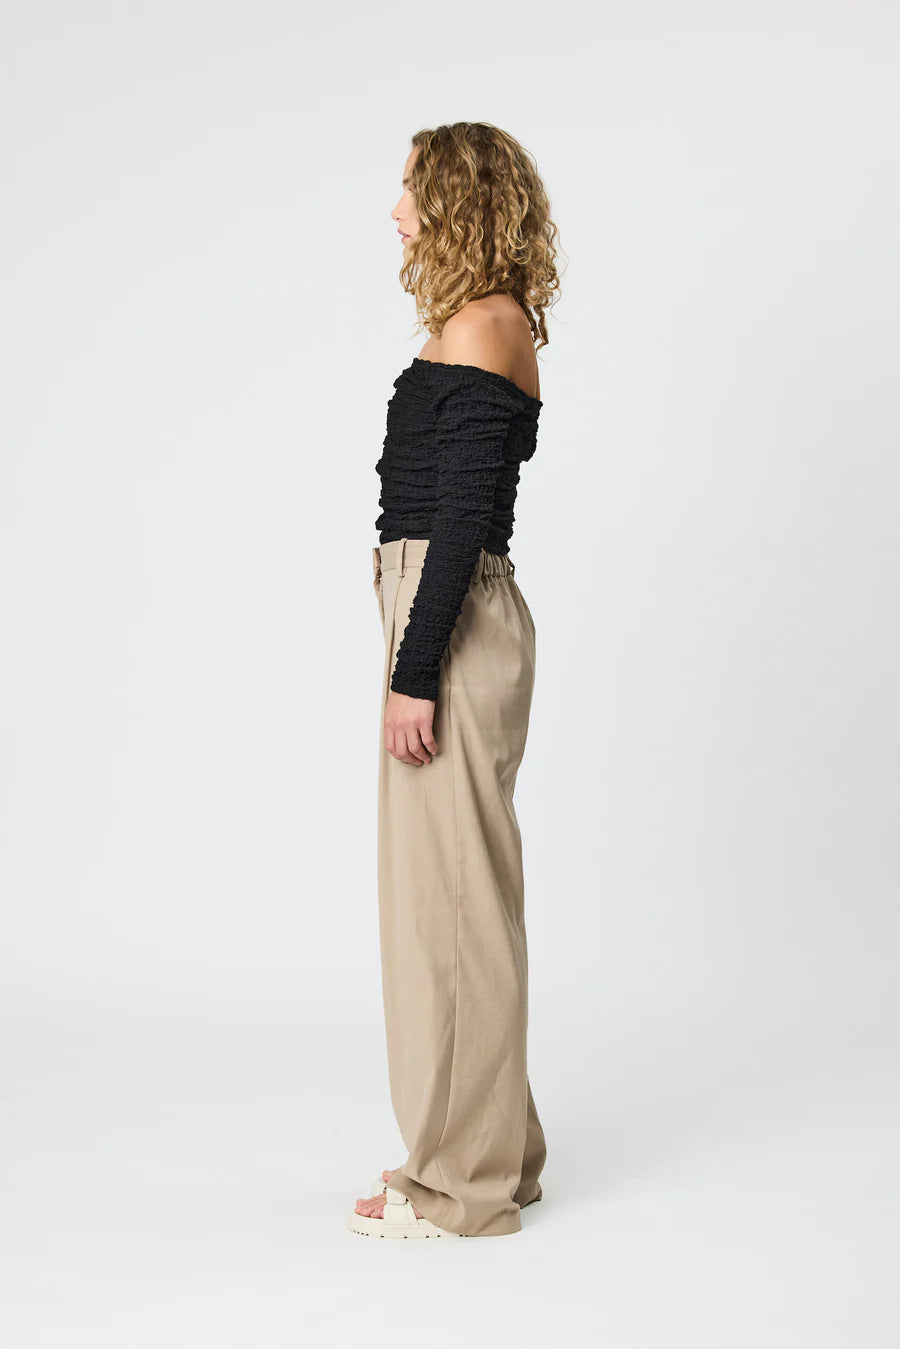 Evie Tailored Pants Oat